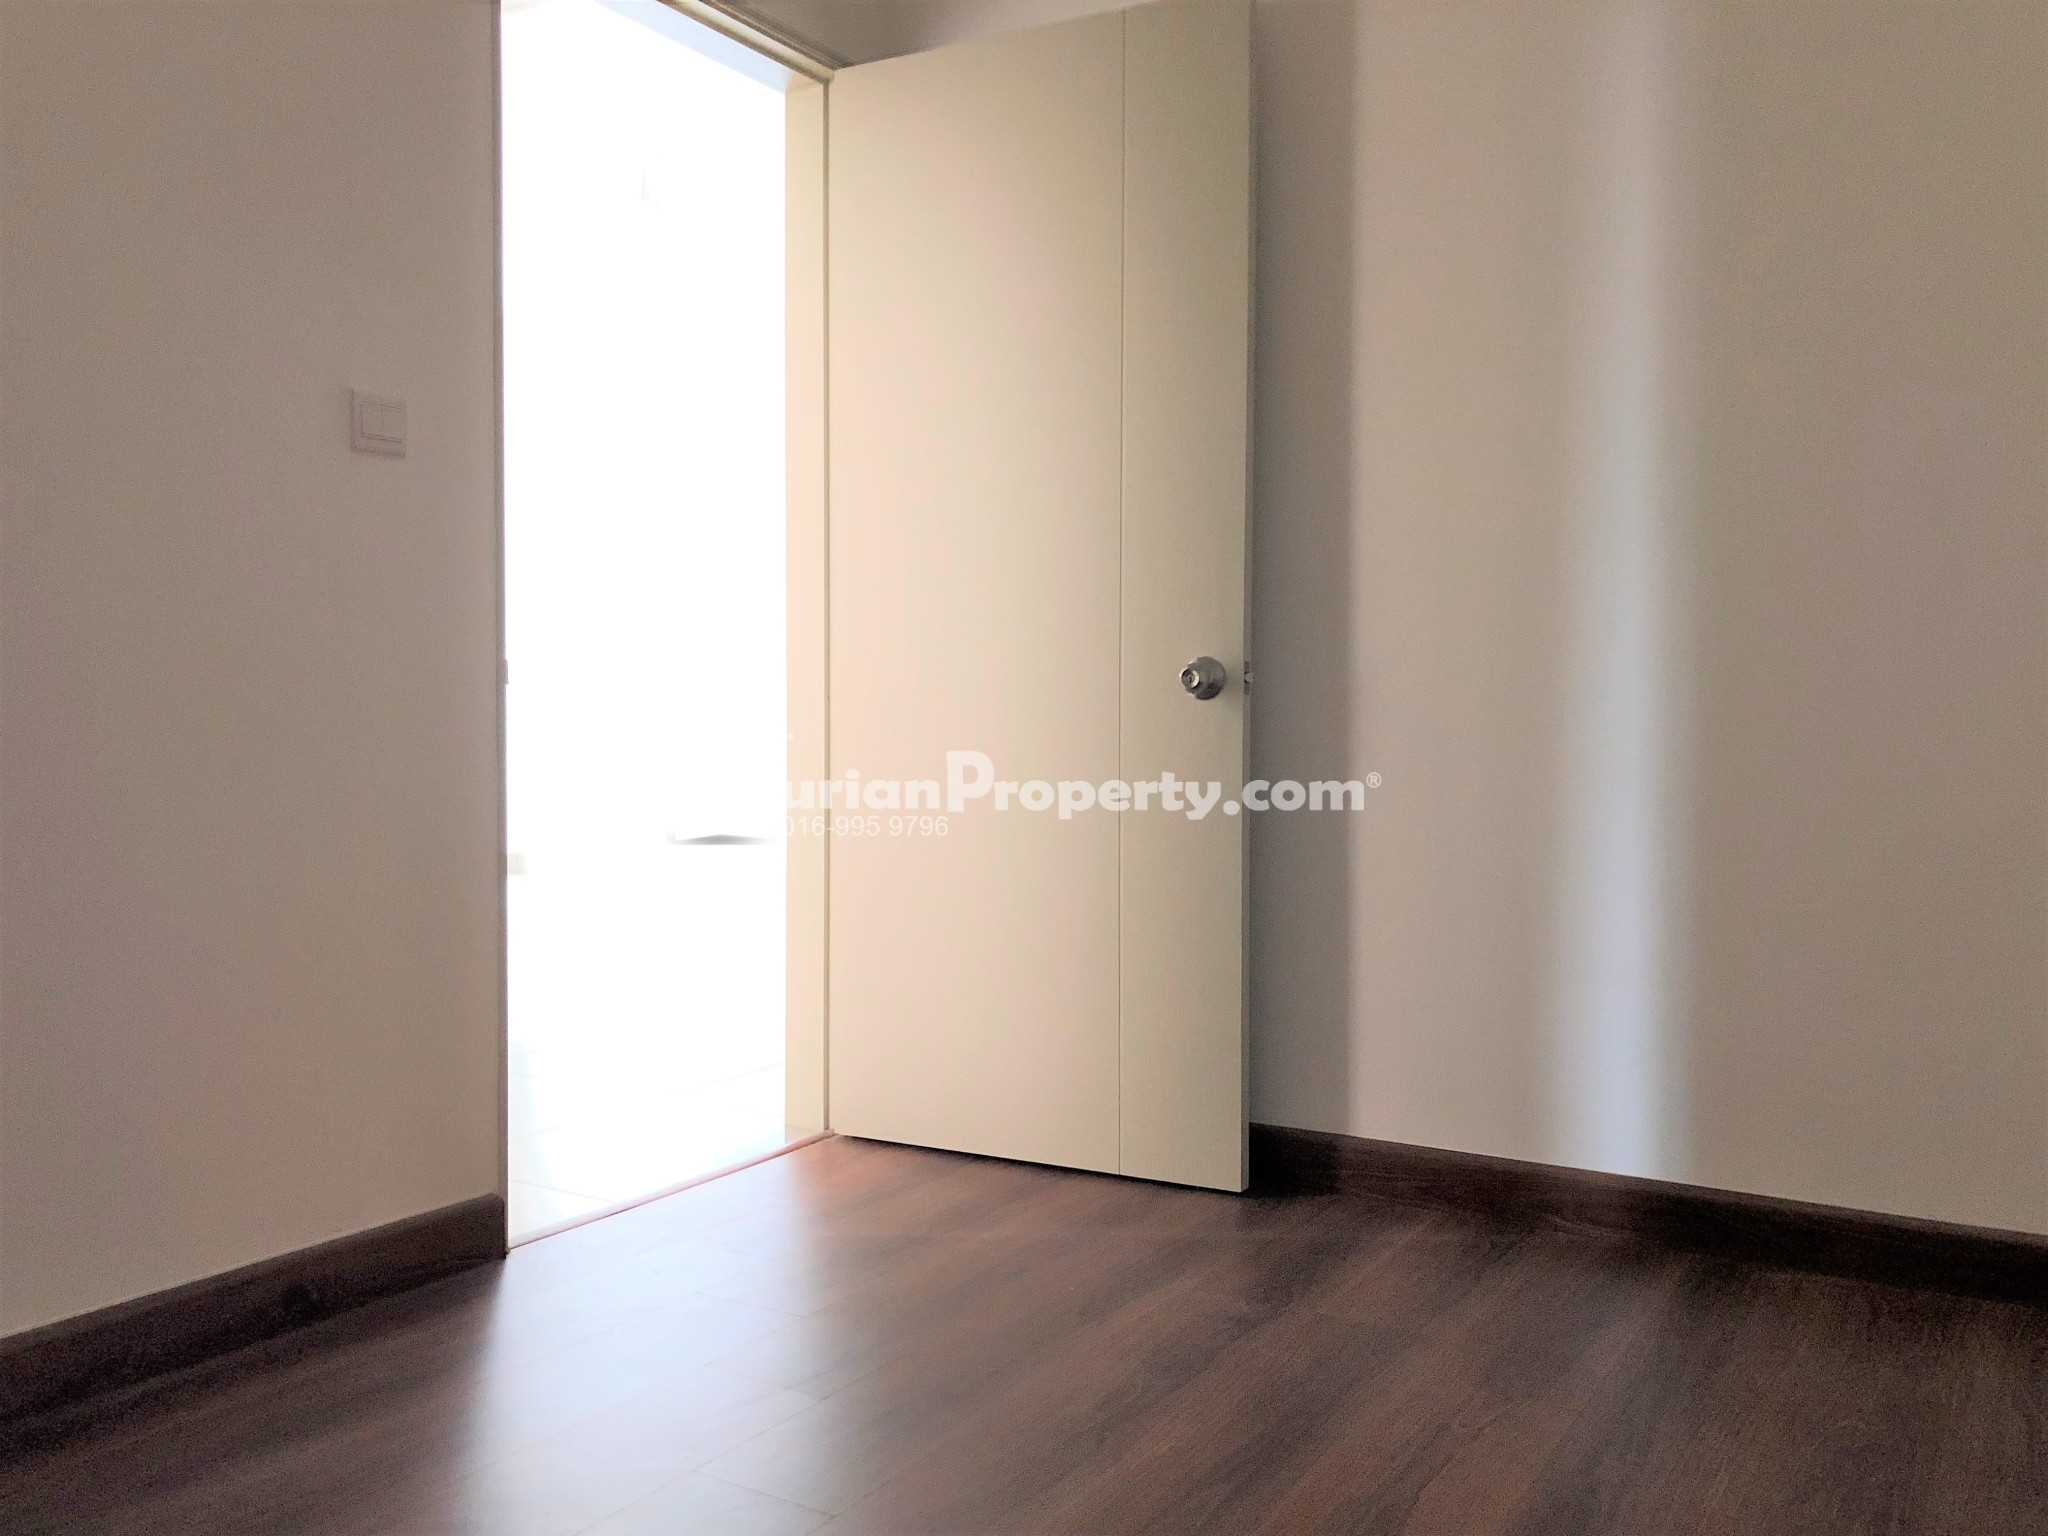 Condo For Rent at The Nest Residences